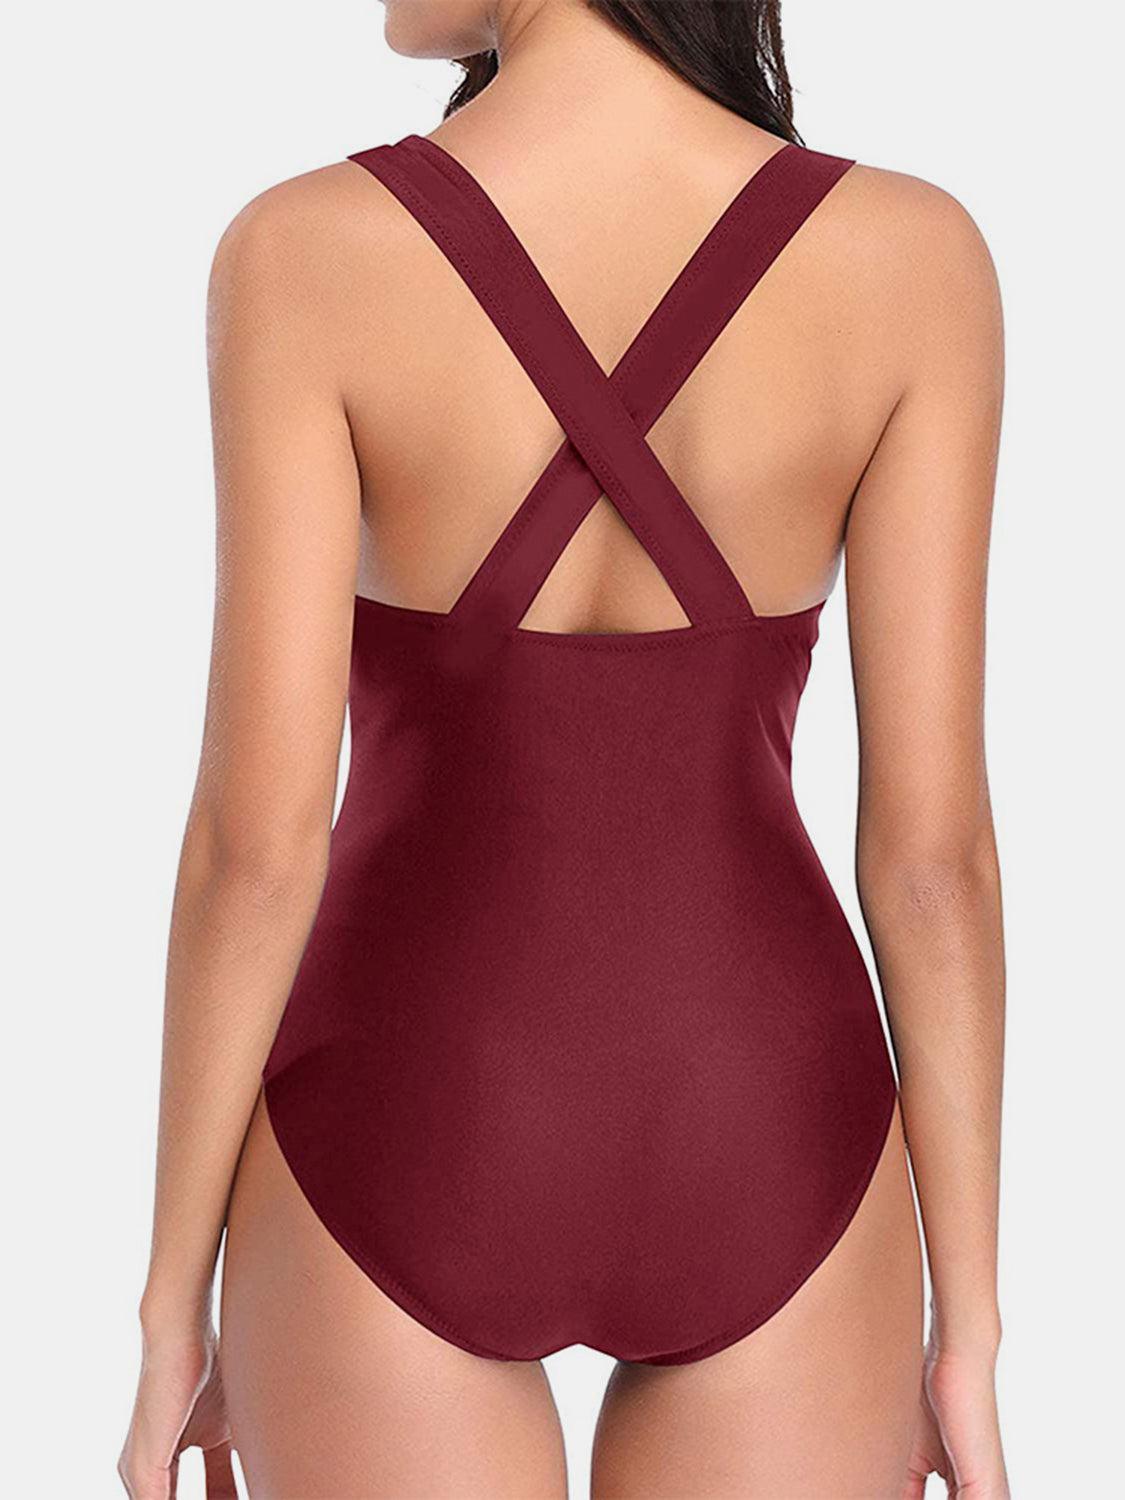 a woman in a maroon one piece swimsuit